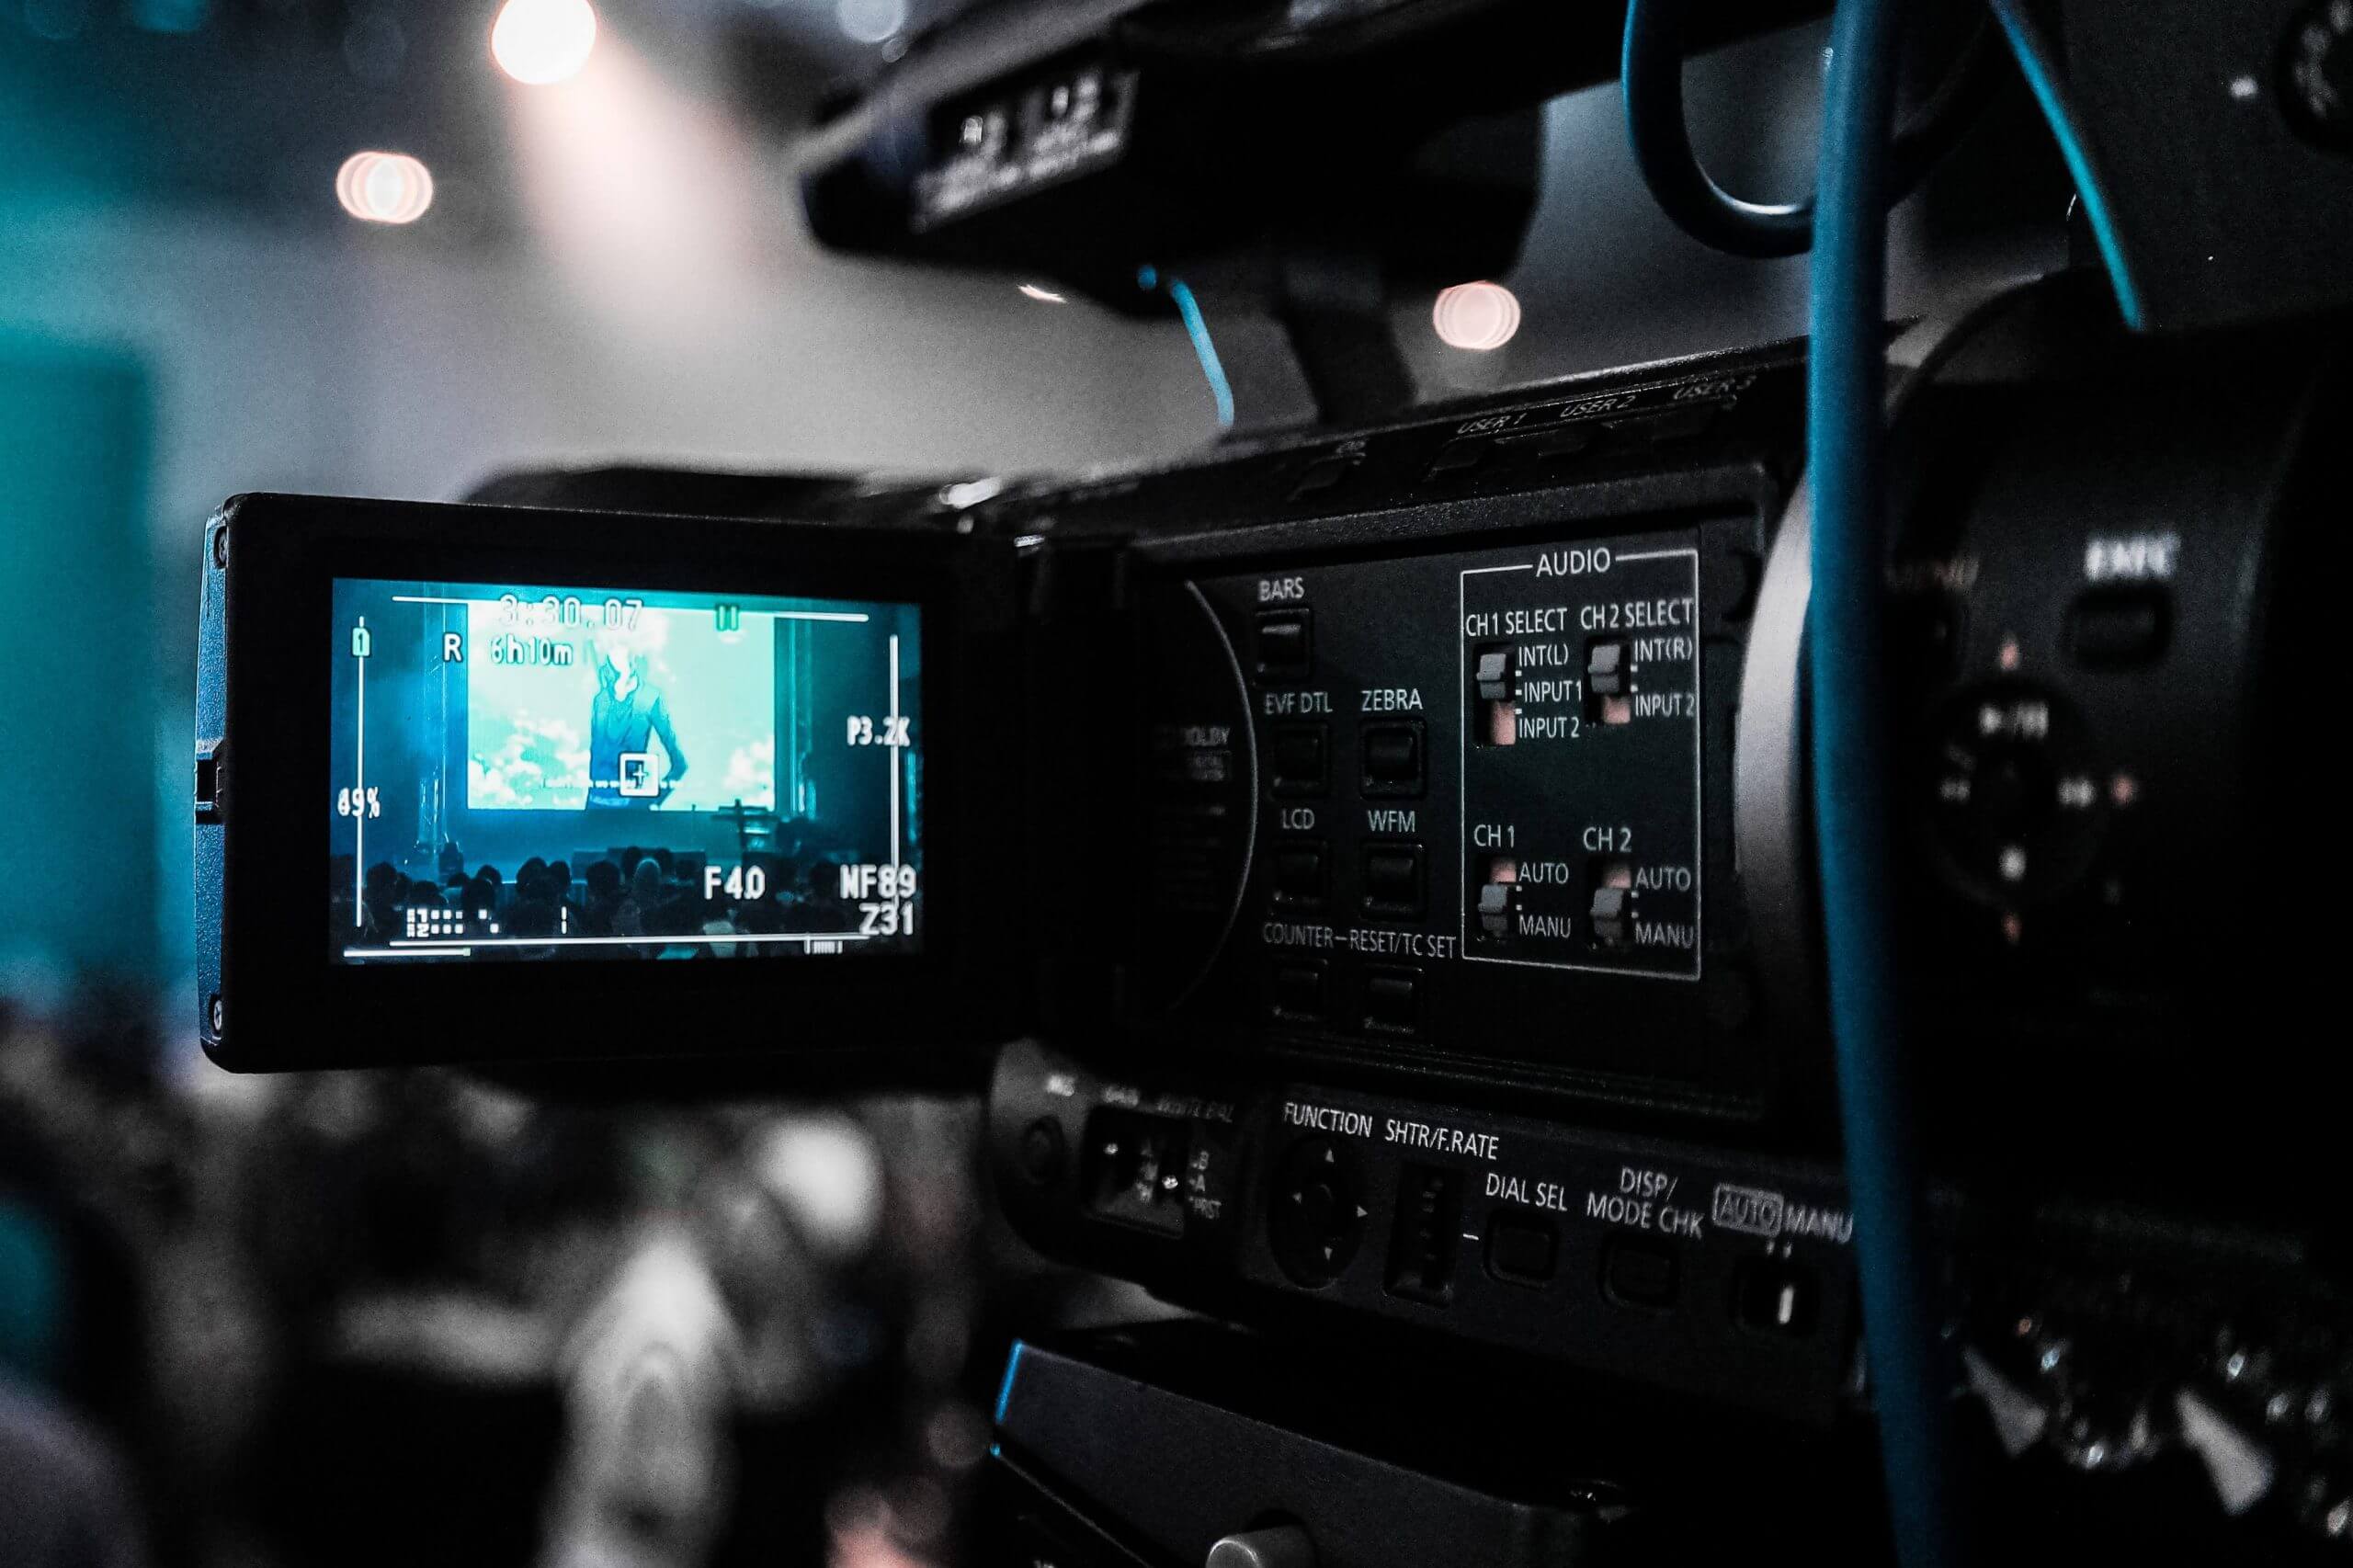 16 Video Ideas to Supercharge Your Business